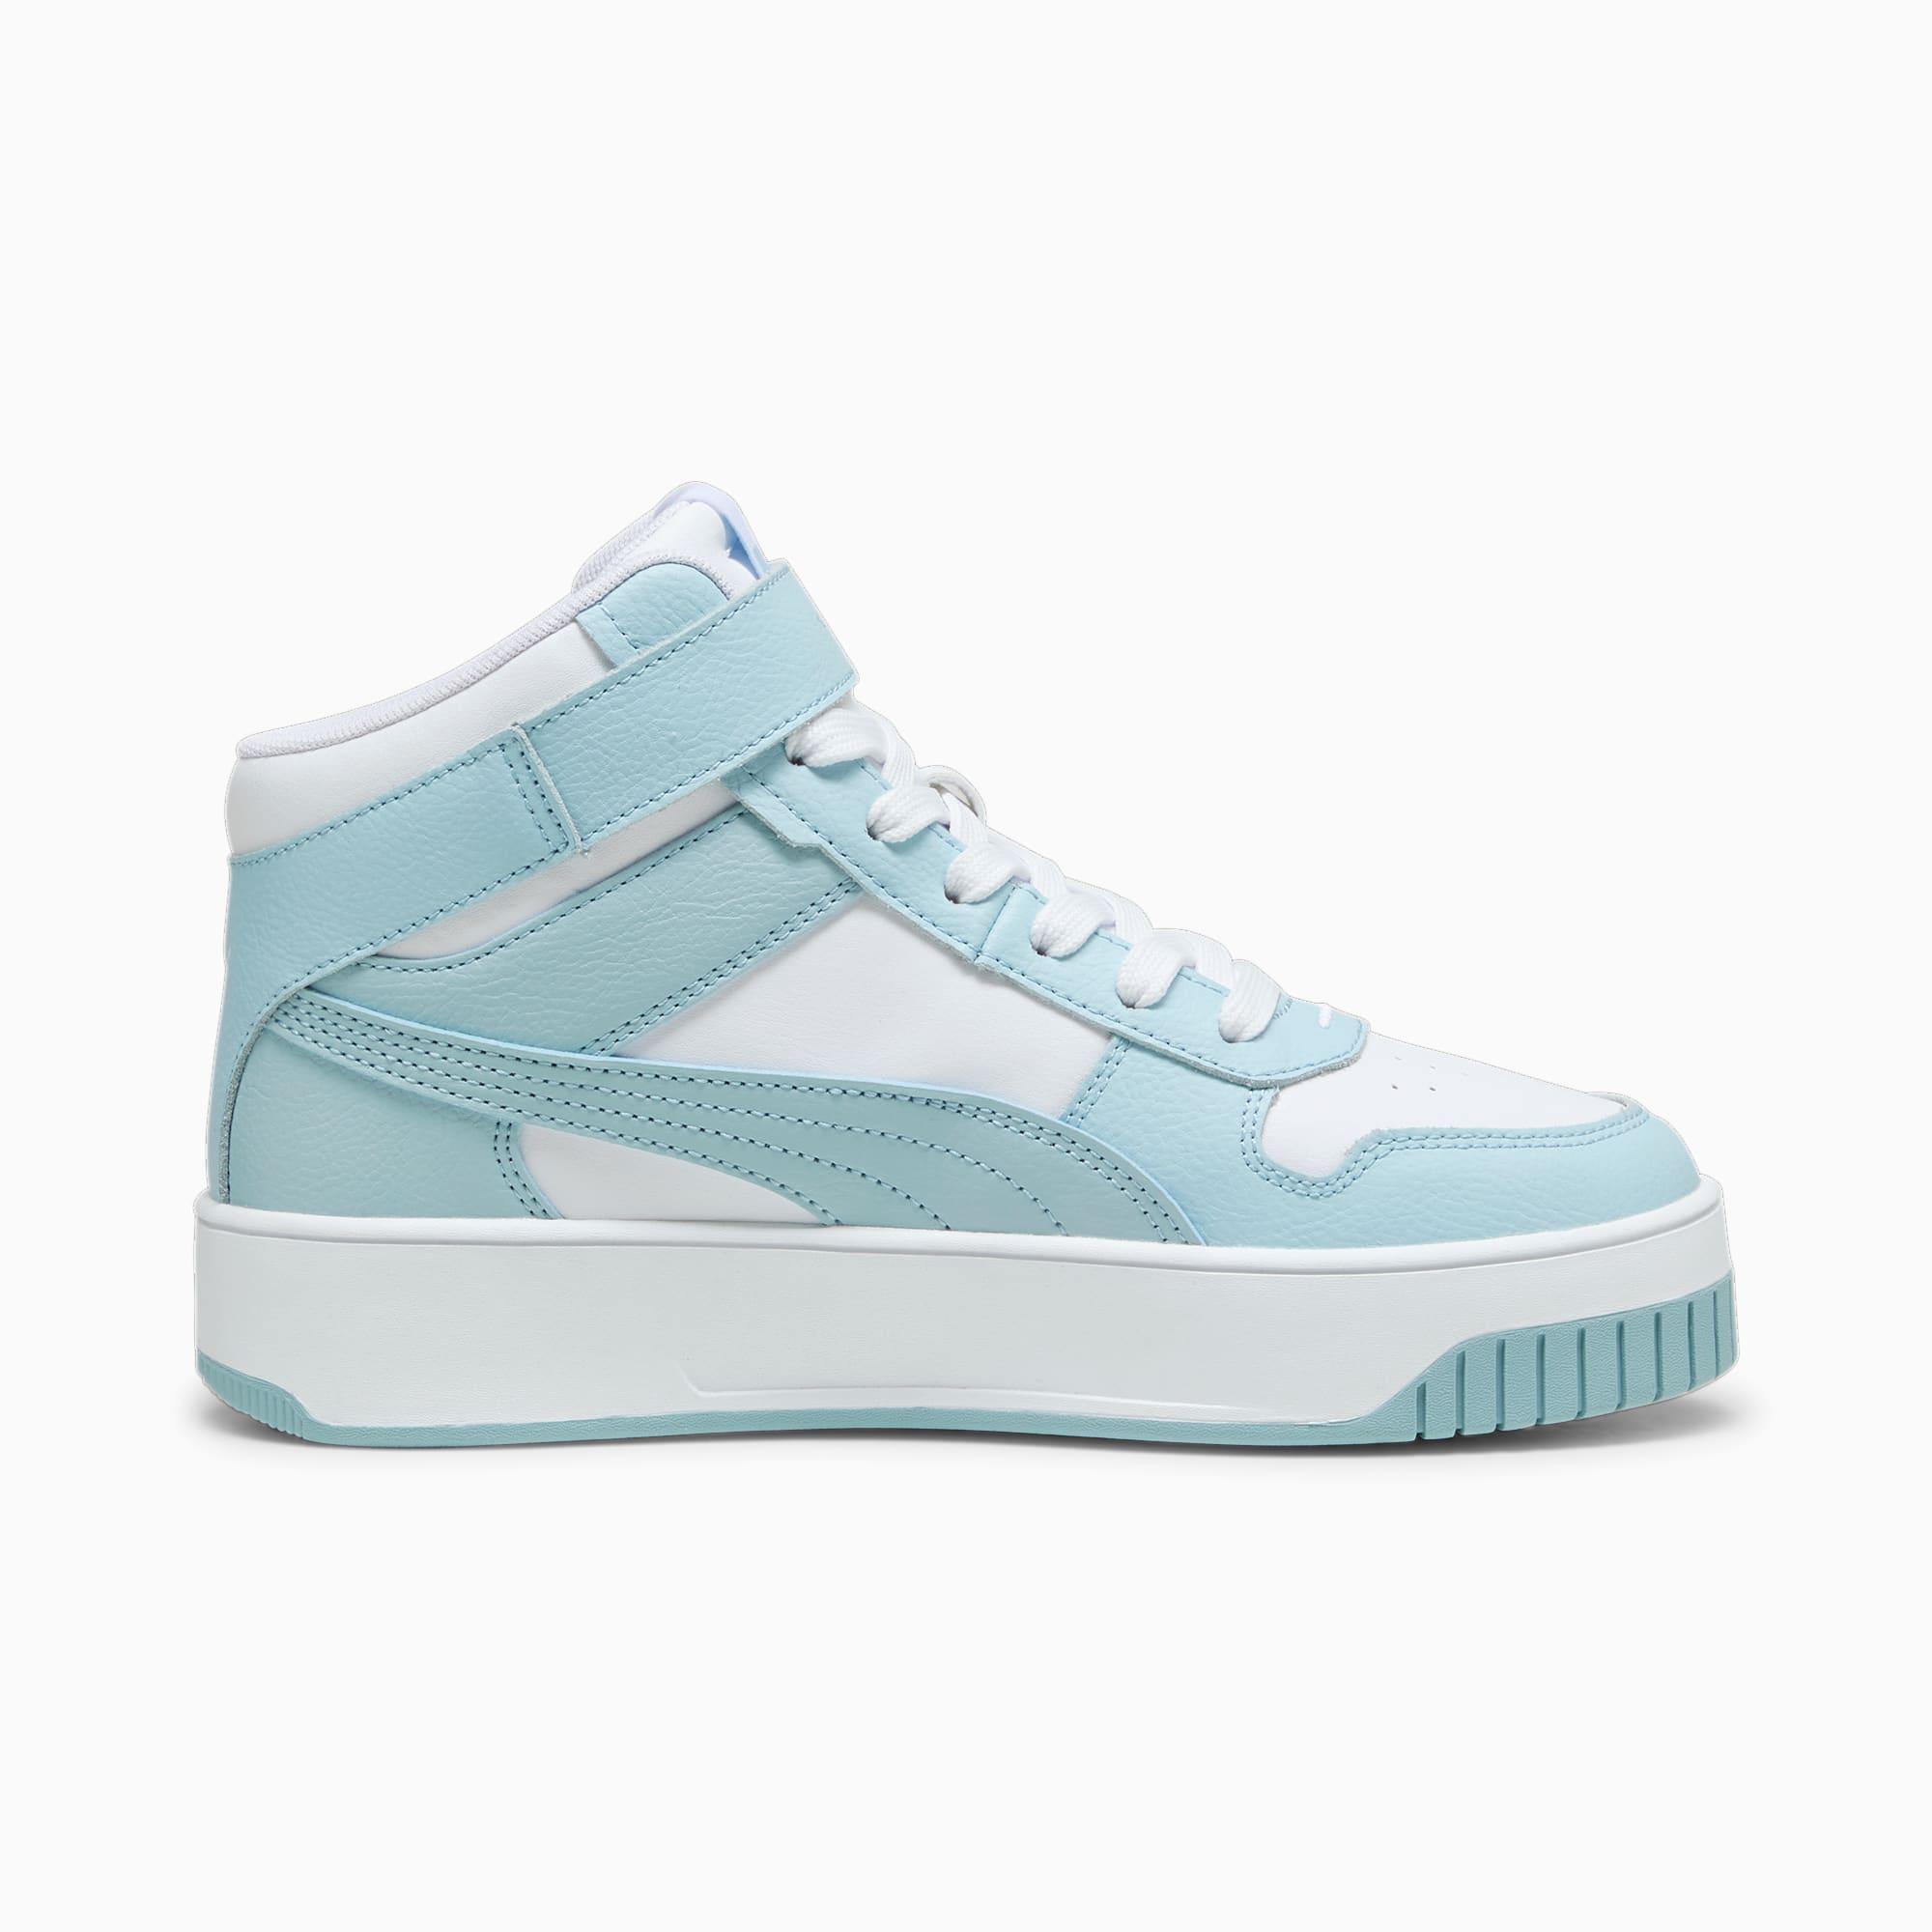 PUMA Carina Street Mid Women's Sneakers, White/Turquoise Surf, Size 40,5, Shoes